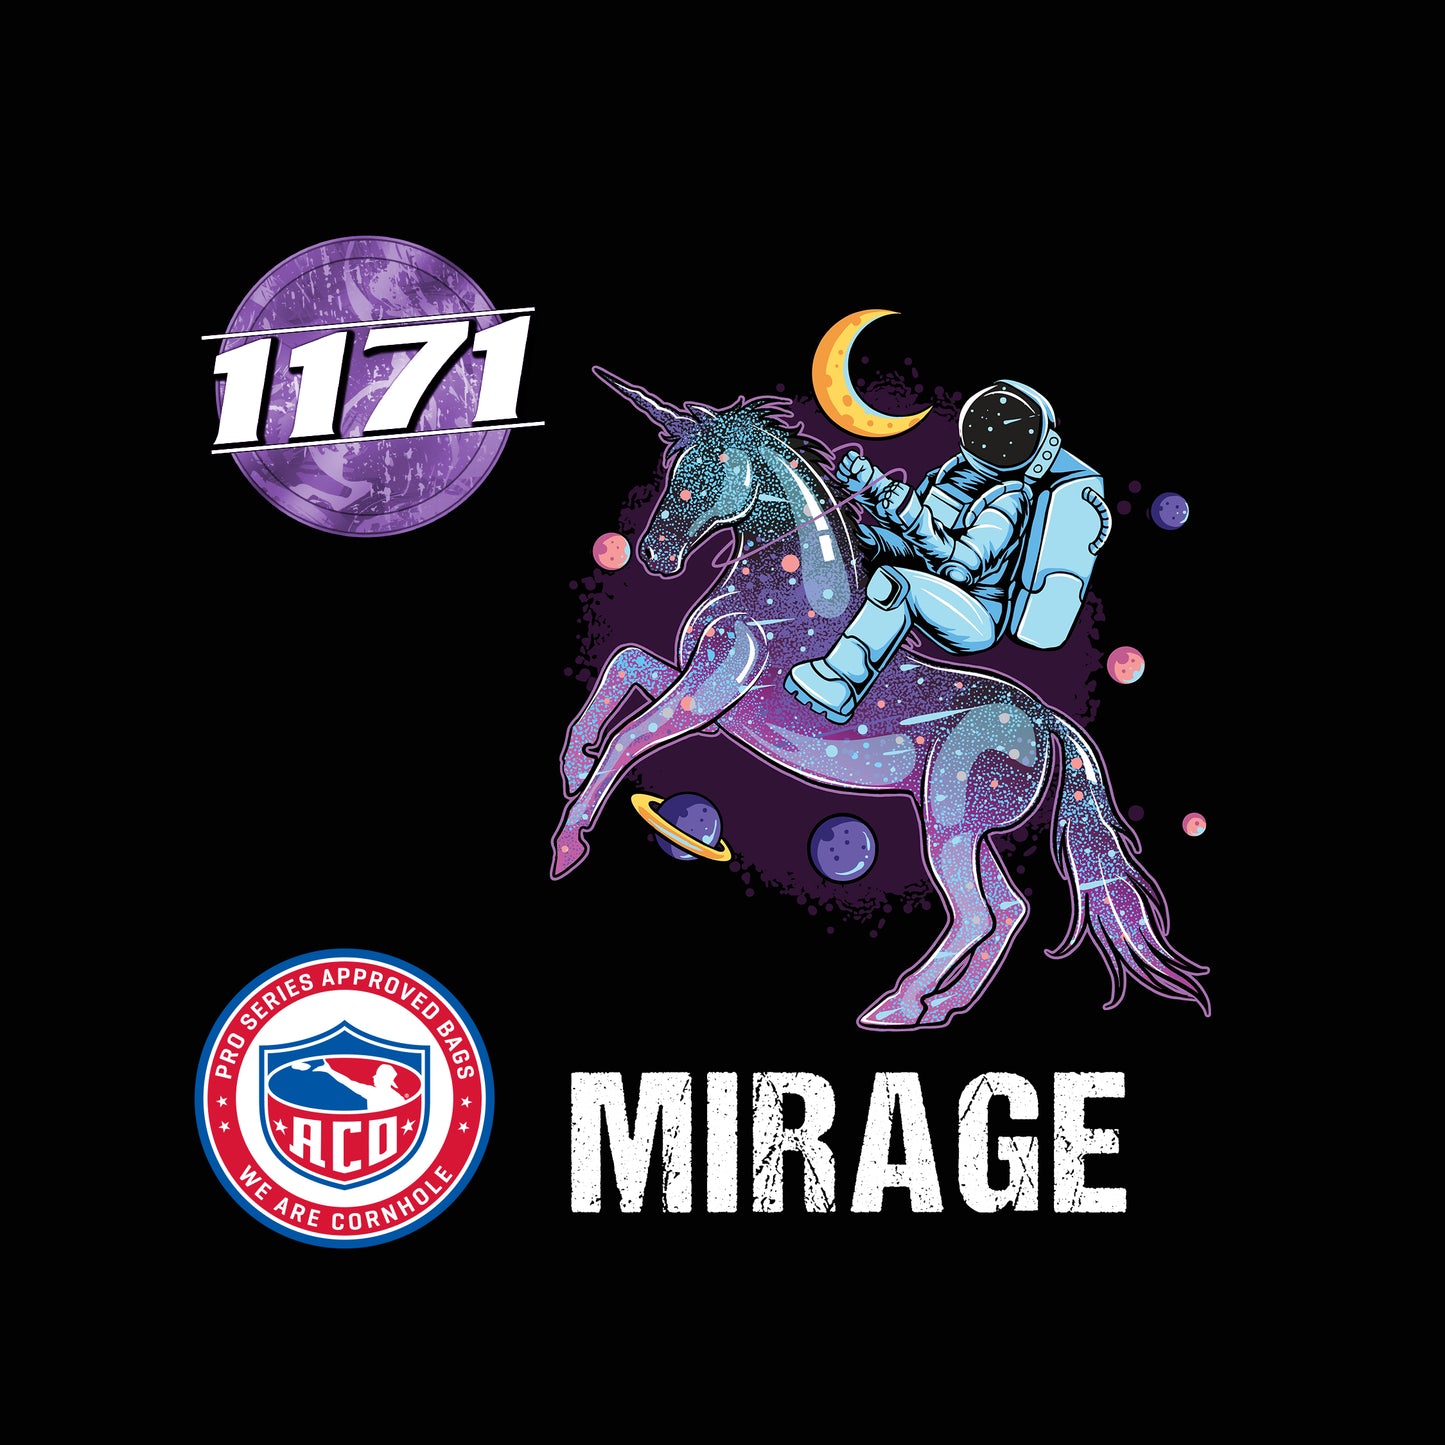 1171 Mirage “Unicorn in Space” 4/8